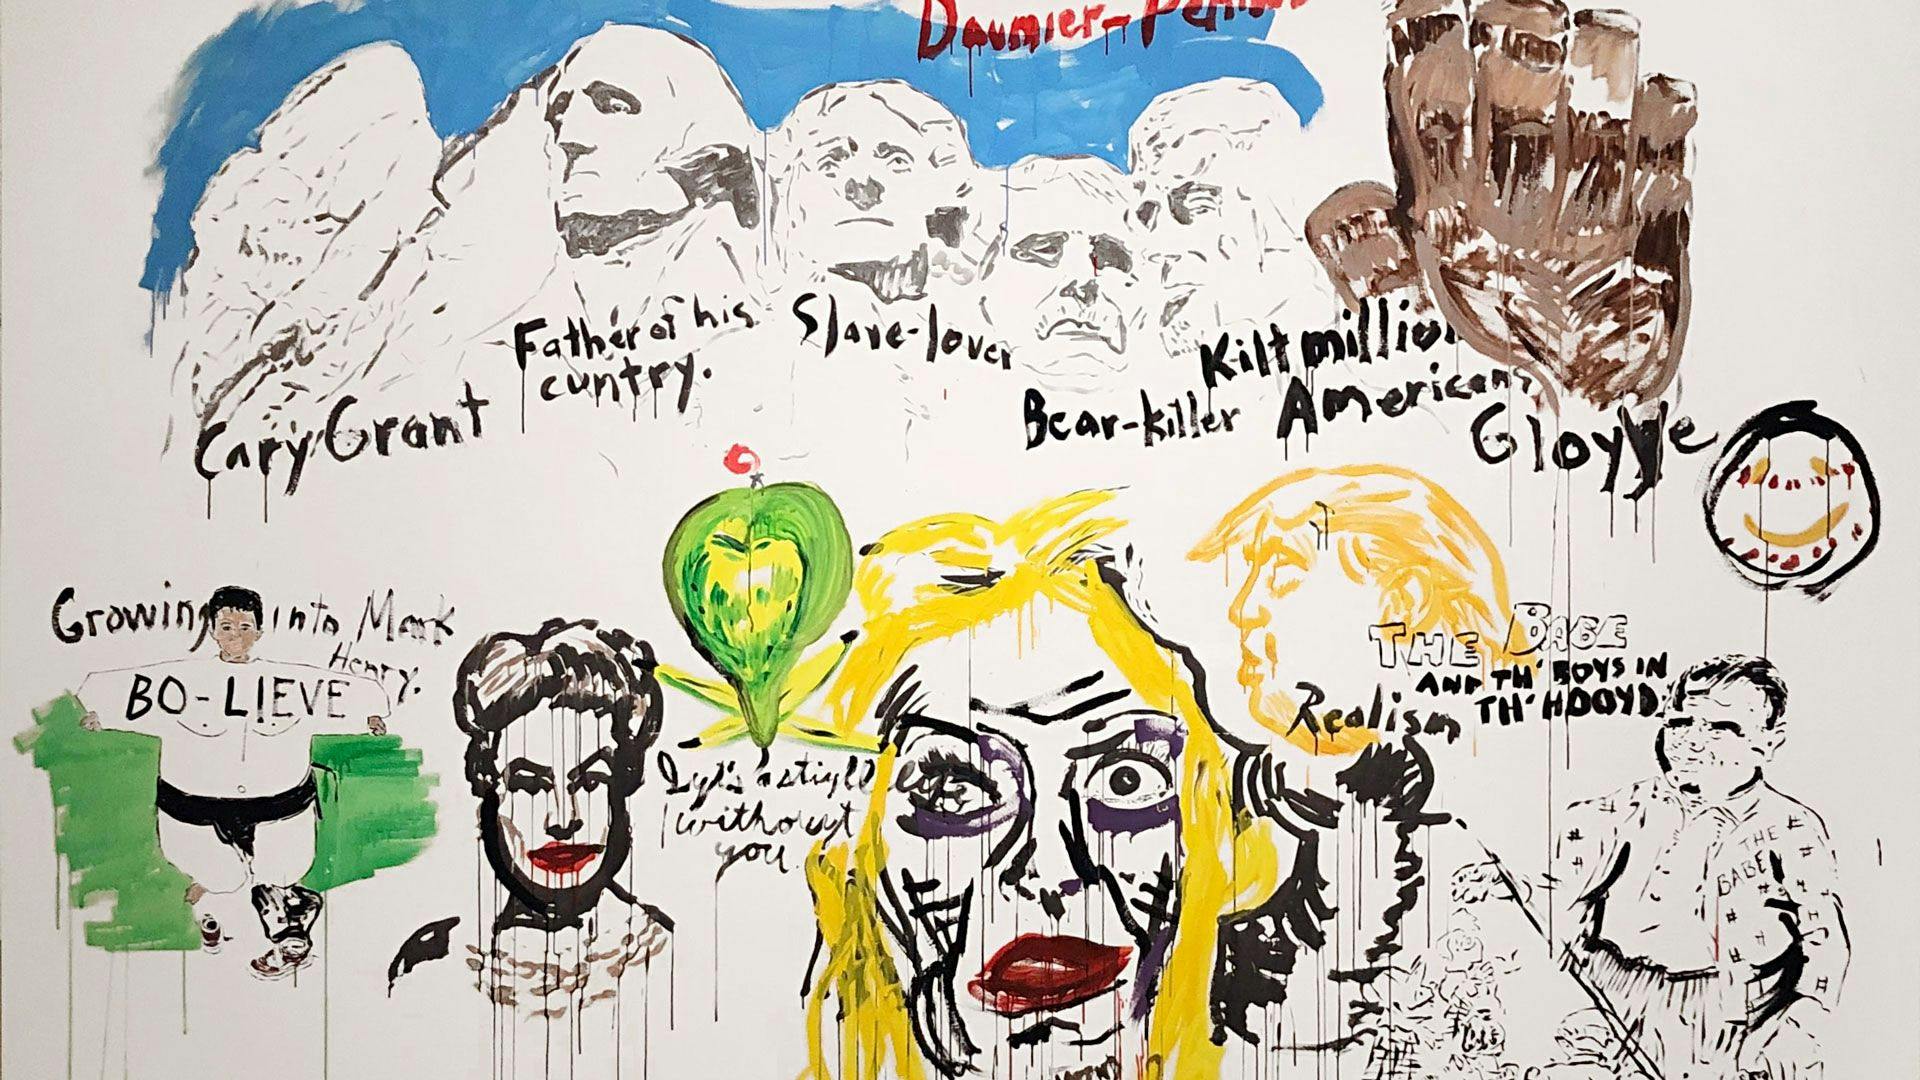 A detail from a mural by Raymond Pettibon, titled No Title (Daumier-Pettibon Father of...), dated 2019.